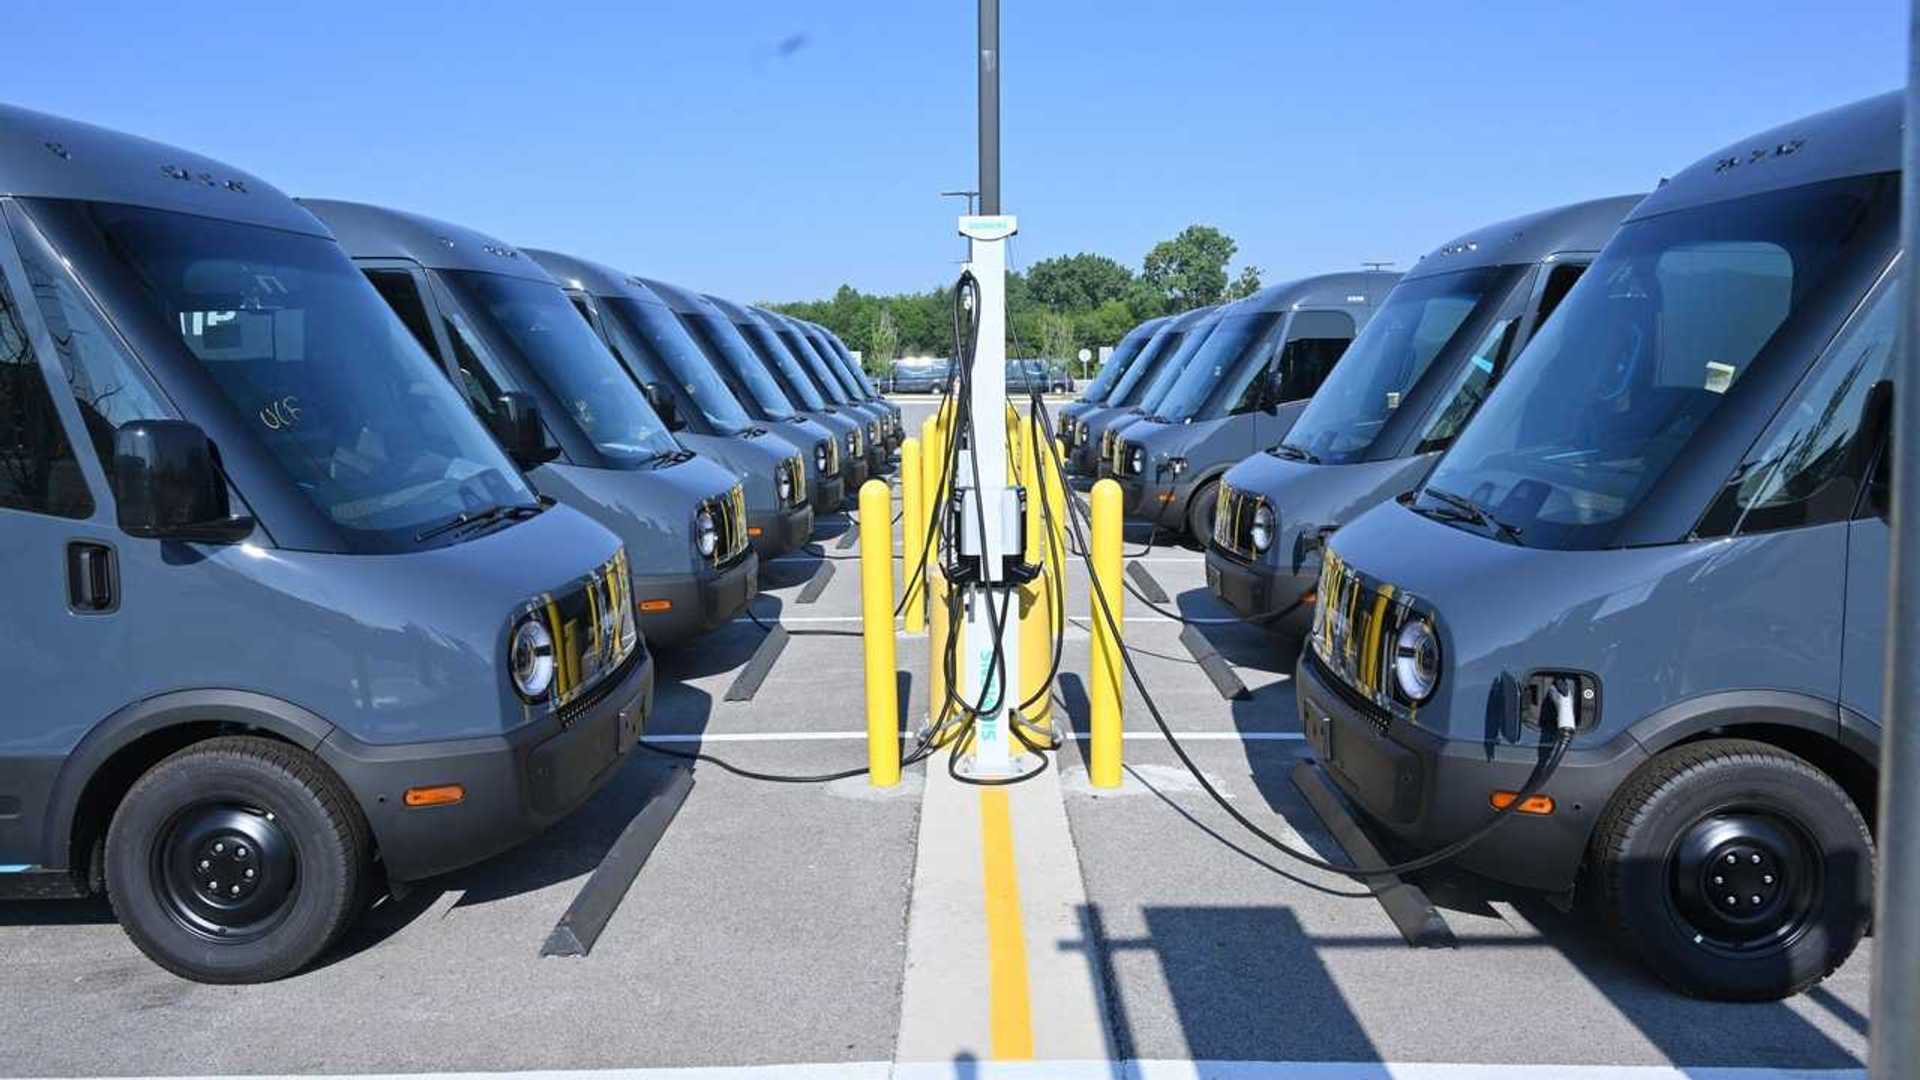 amazon has doubled the size of its rivian edv fleet to 10,000 units